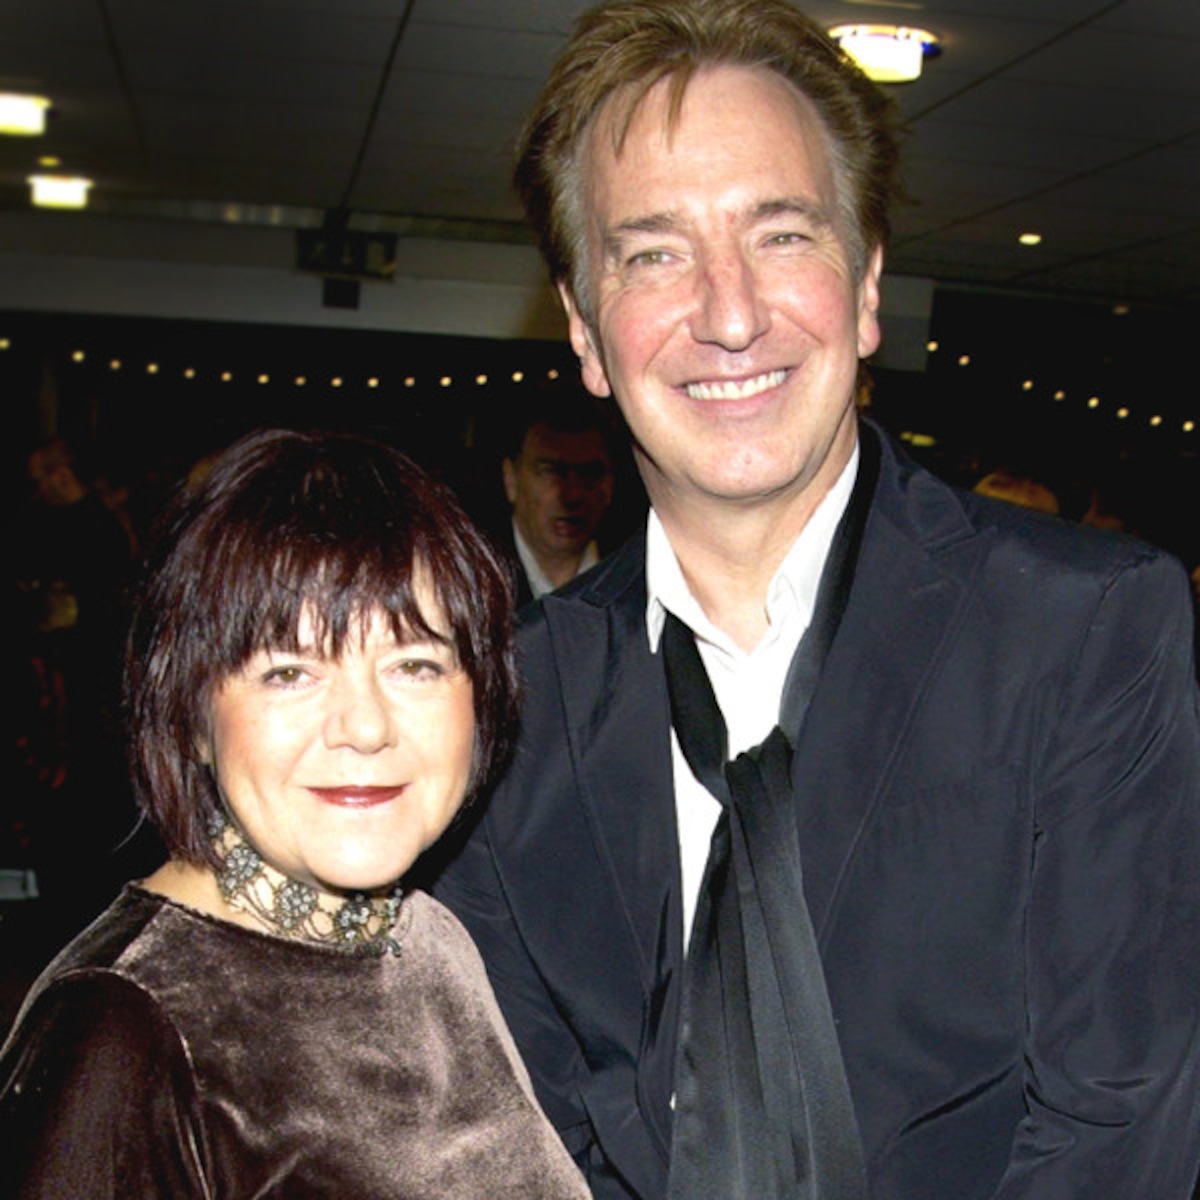 Surprise! Alan Rickman Married Rima Horton After 40 Years Together - E! Online